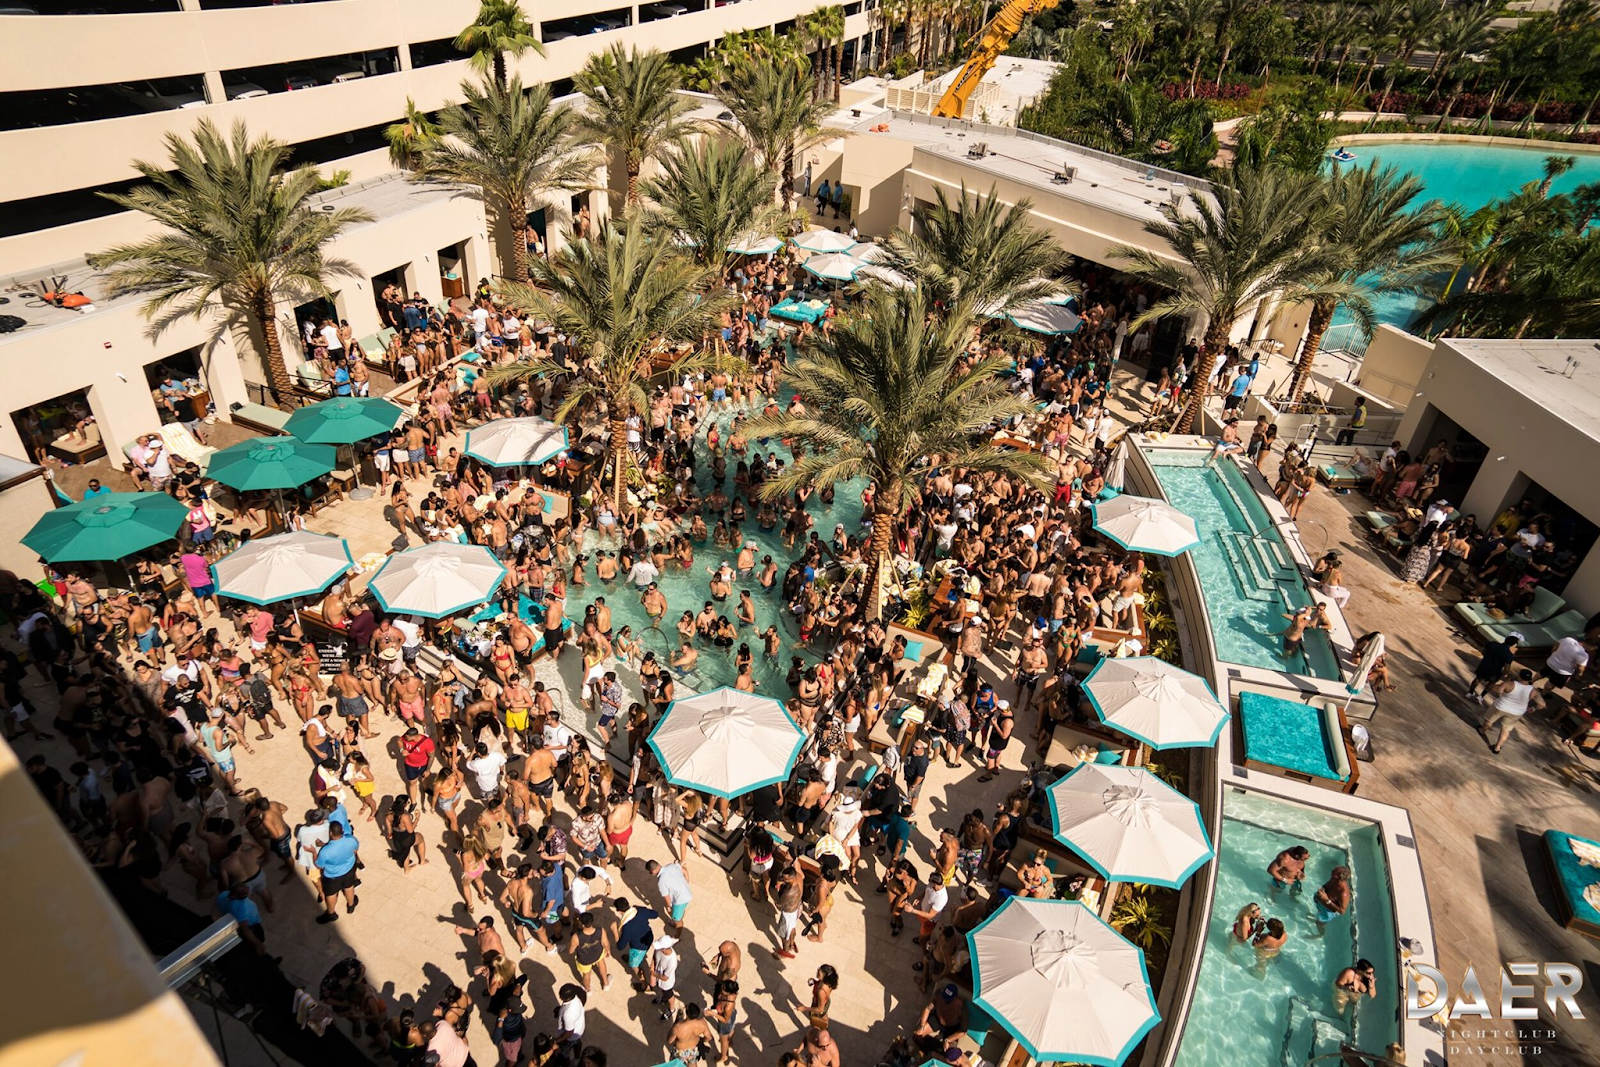 Image of Daer Dayclub Fort Lauderdale